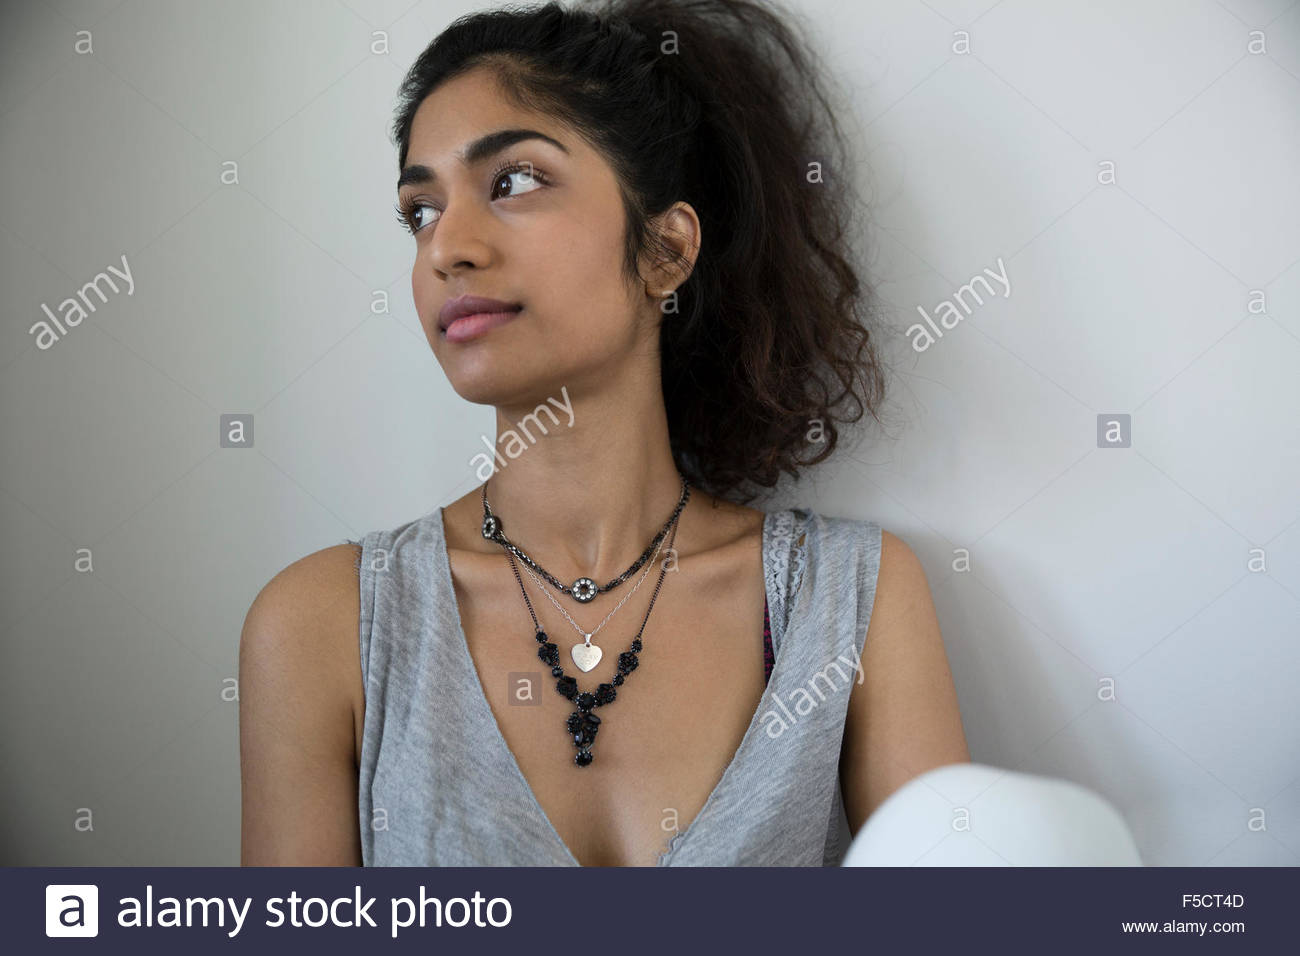 Pensive young woman with black hair looking away Banque D'Images